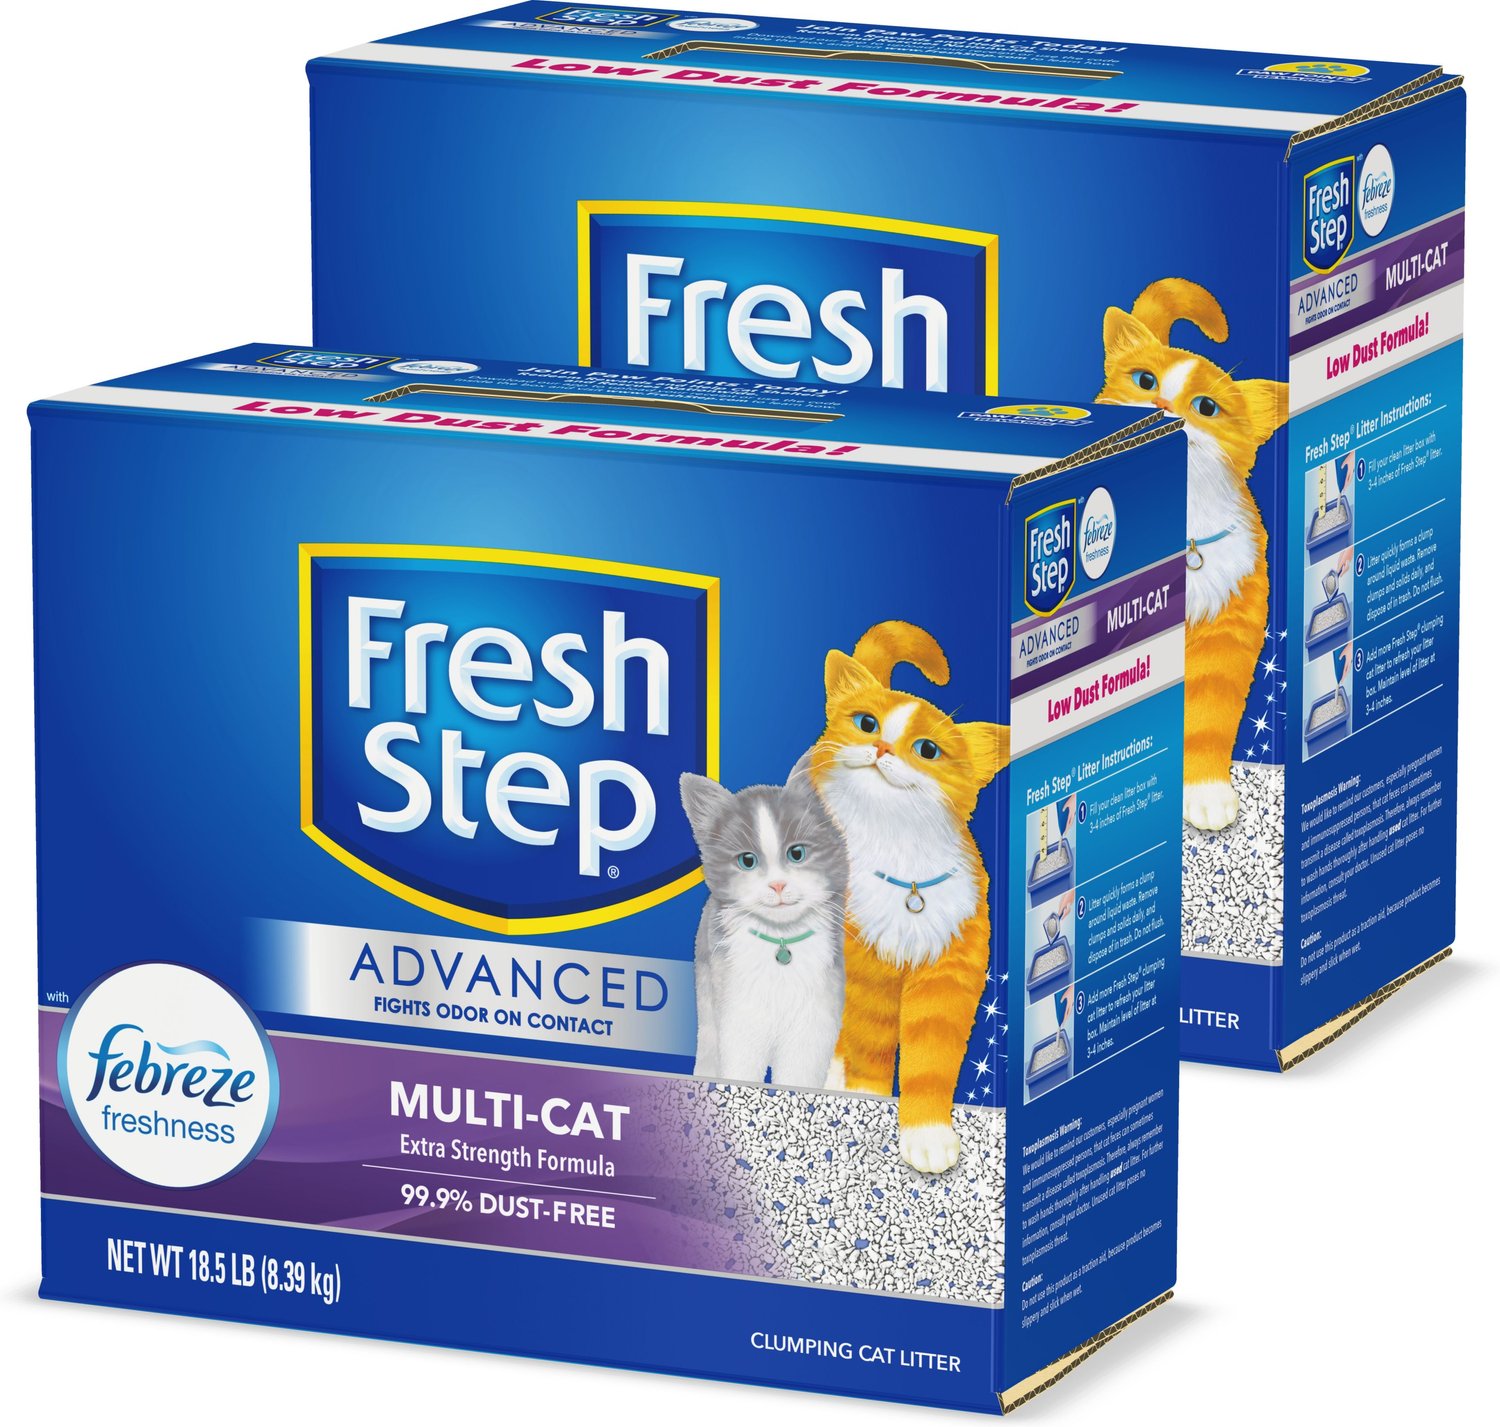 FRESH STEP Advanced MultiCat Febreze Freshness Scented Clumping Clay